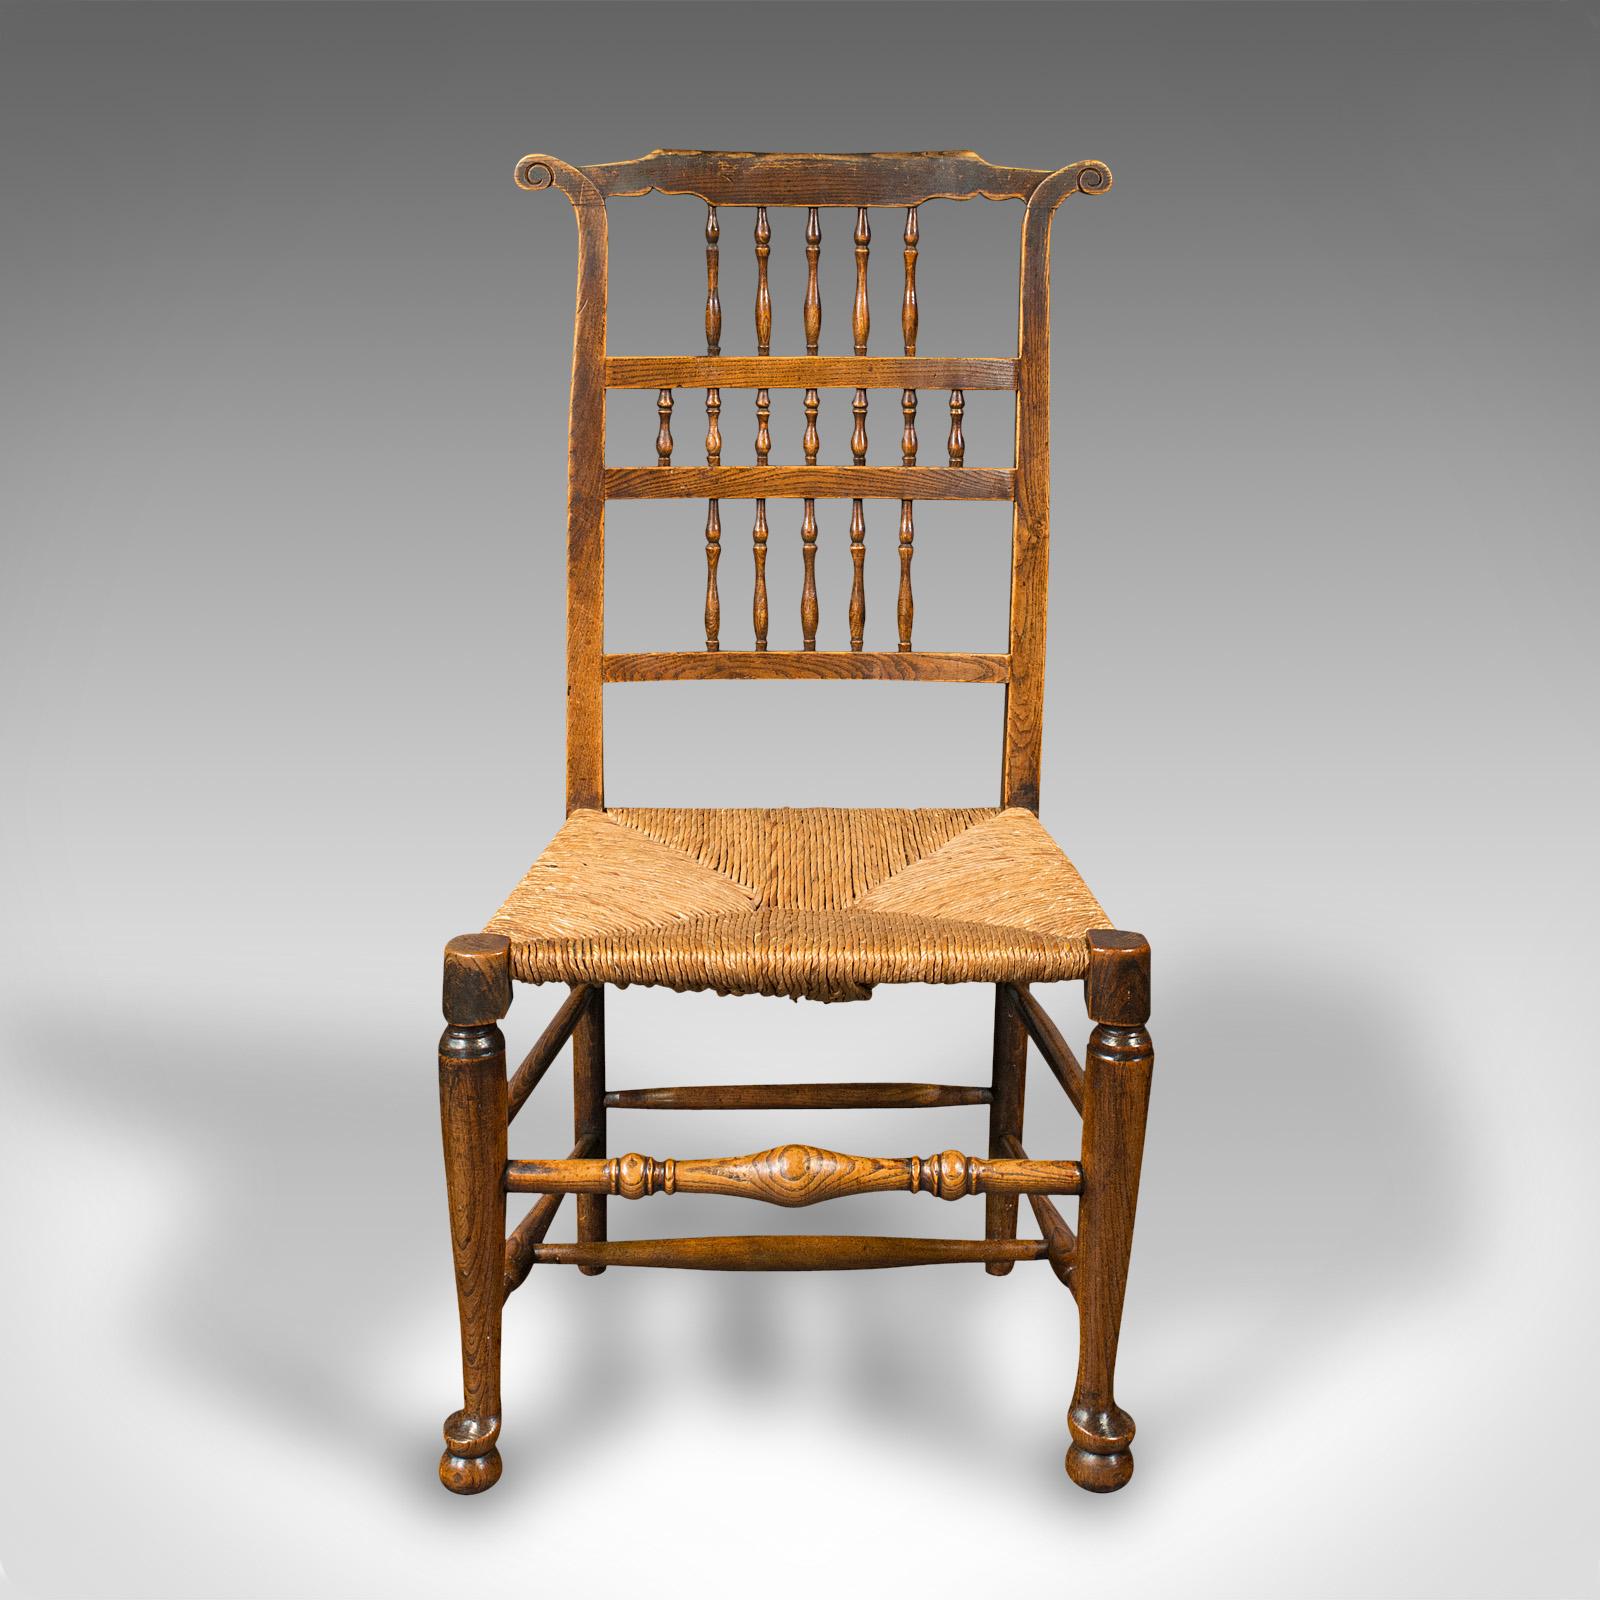 This is a pair of antique spindleback rush country chairs. An English, oak hall or dining seat in the Lancashire taste, dating to the early Victorian period, circa 1850.

Delightful seventeen-spindle back with appealing deep rush seats
Displays a